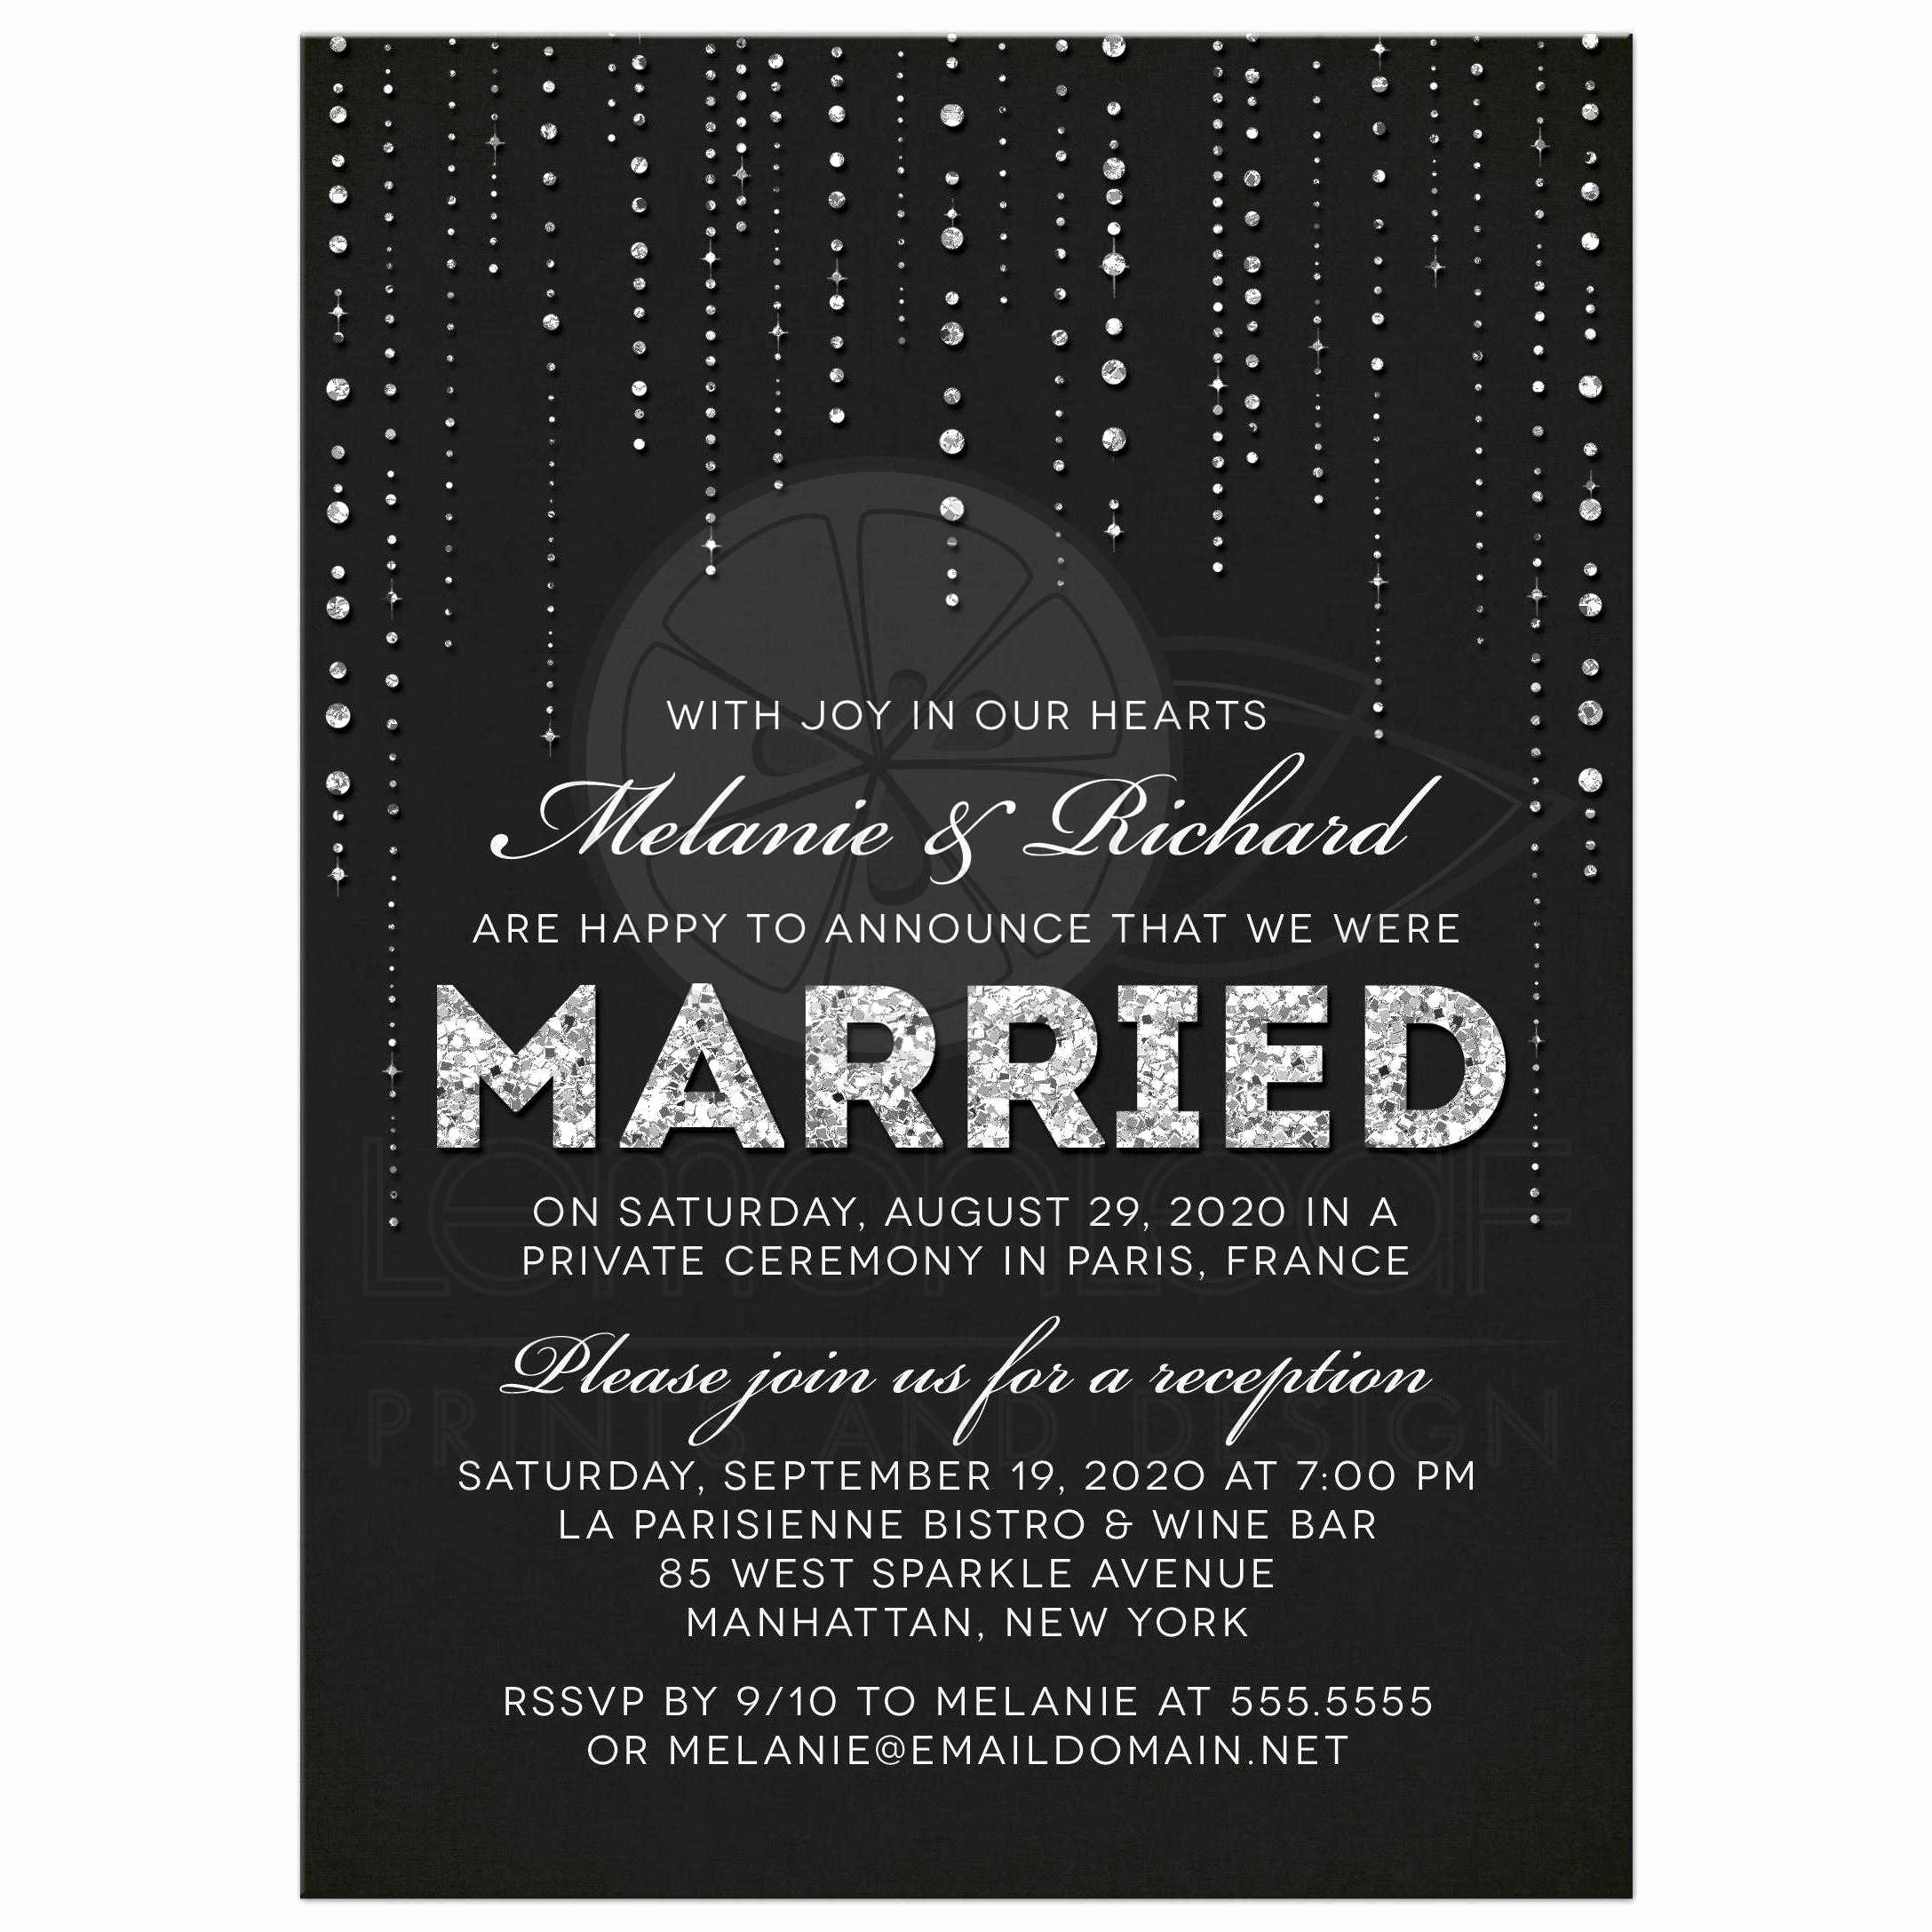 Private Wedding Ceremony Invitation Awesome Post Wedding Reception Ly Invitations Glitter Look